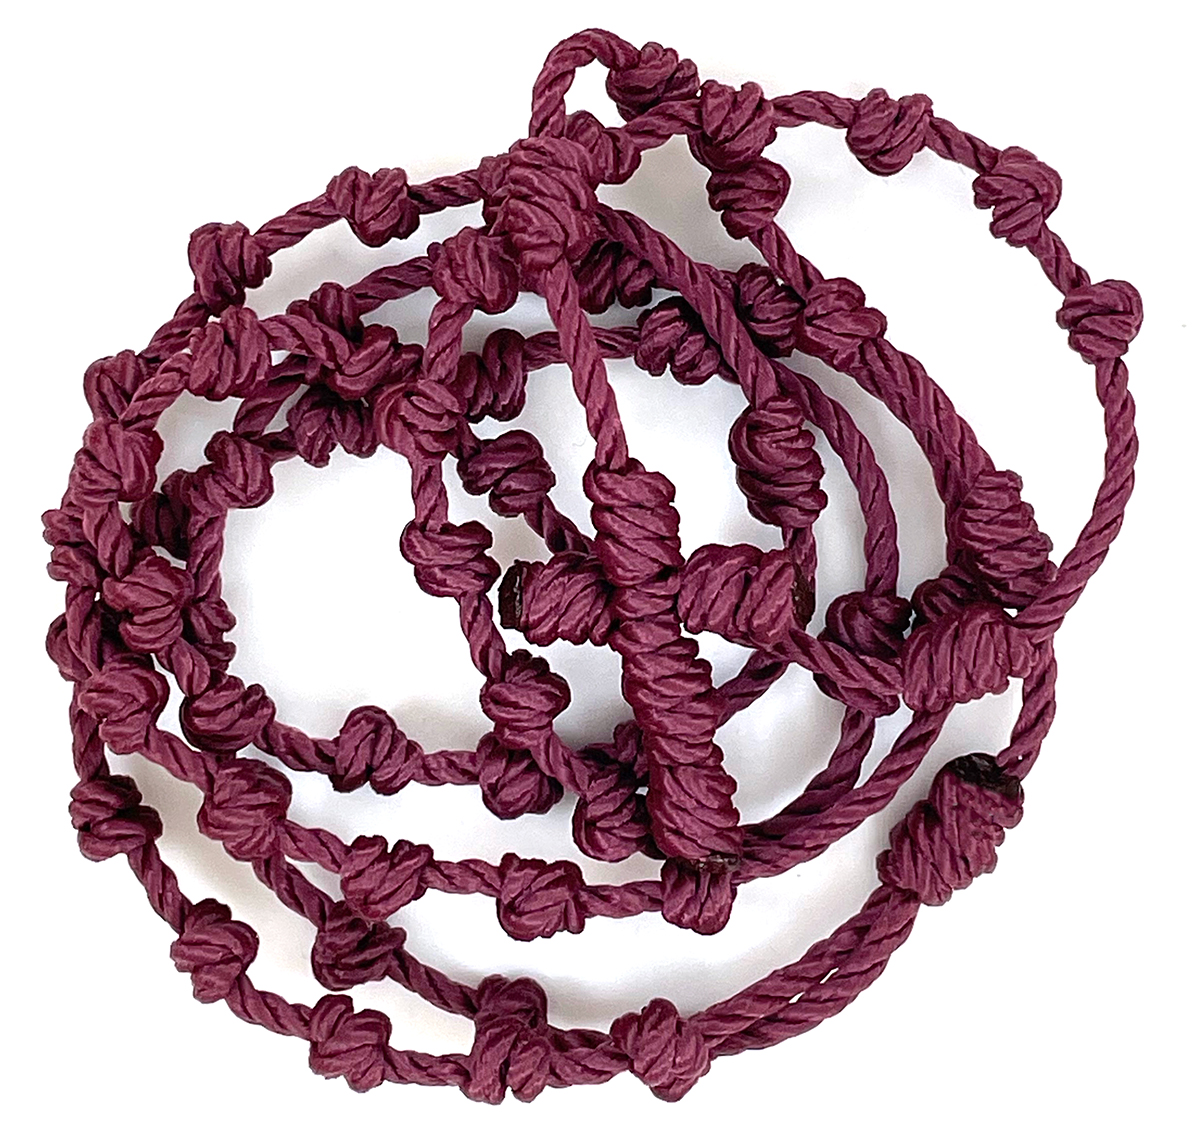 Knotted Bead Rosaries